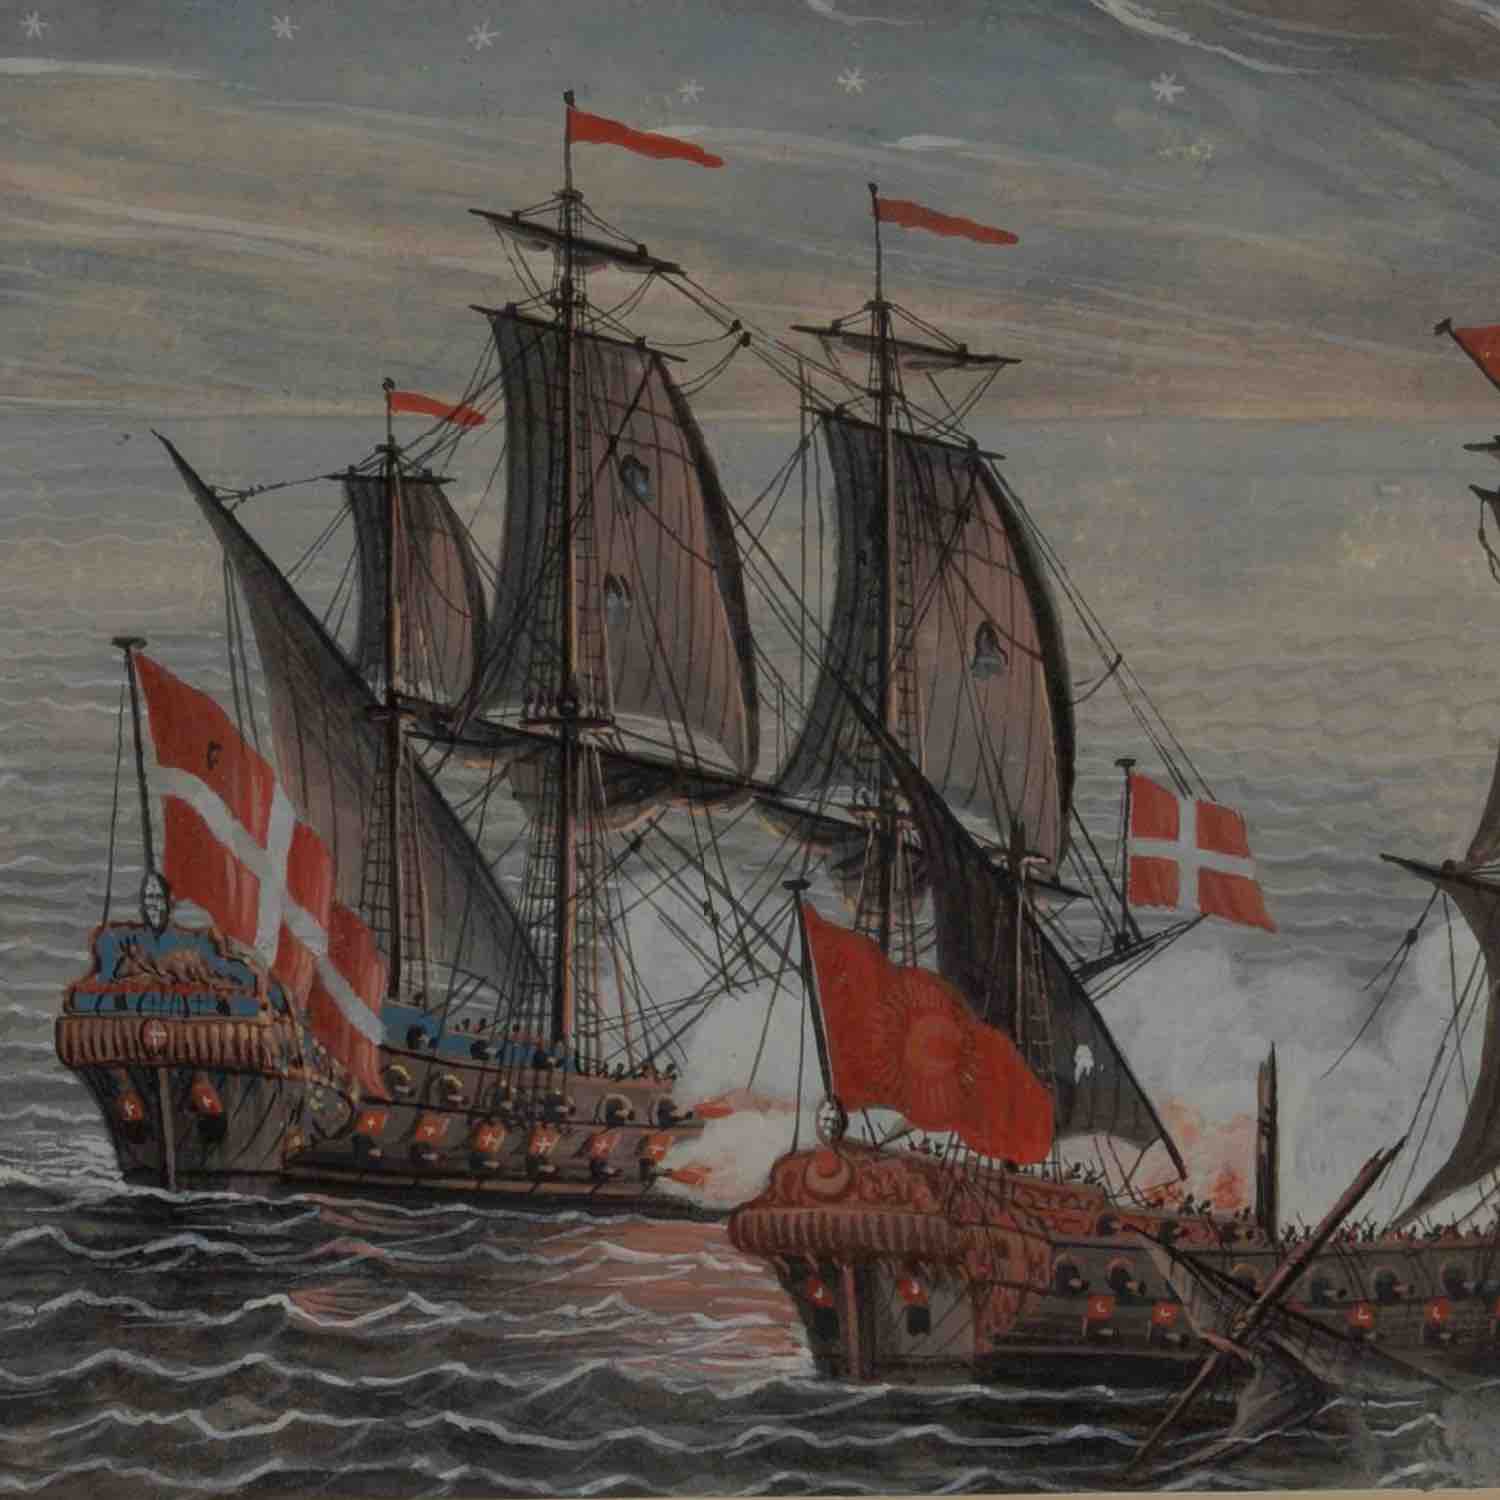 Naval actions of the Order of Saint John, Malta Study Center Collection (<a href='https://w3id.org/vhmml/museum/view/1755'>HMML 00295</a>)